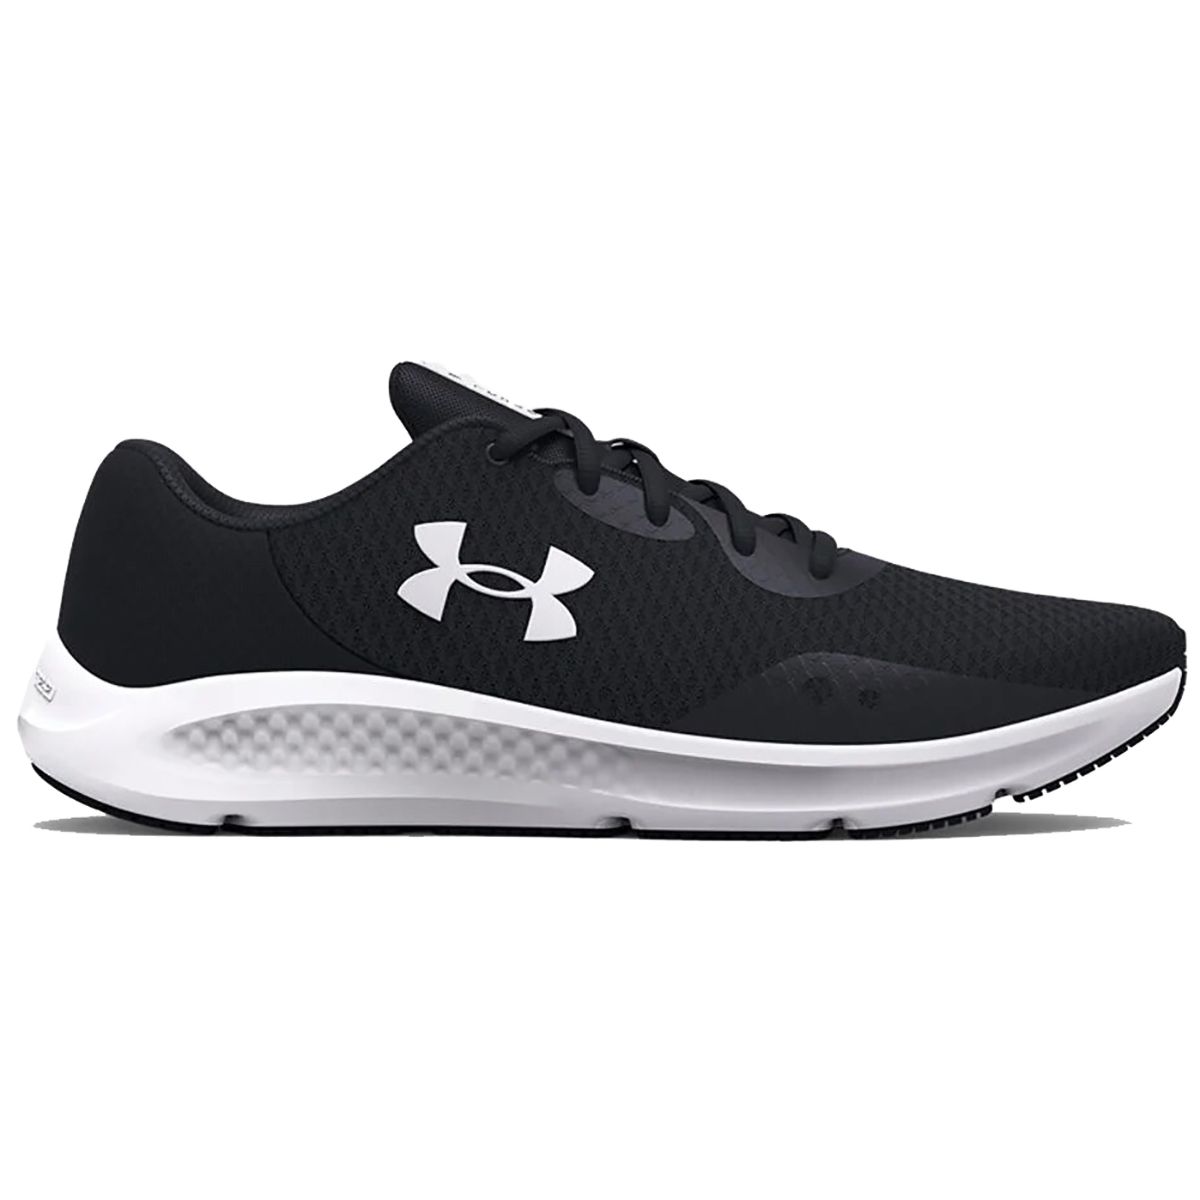 Concentración auge dormitar Under Armour Charged Pursuit 3 Women's Running Shoes 3024889